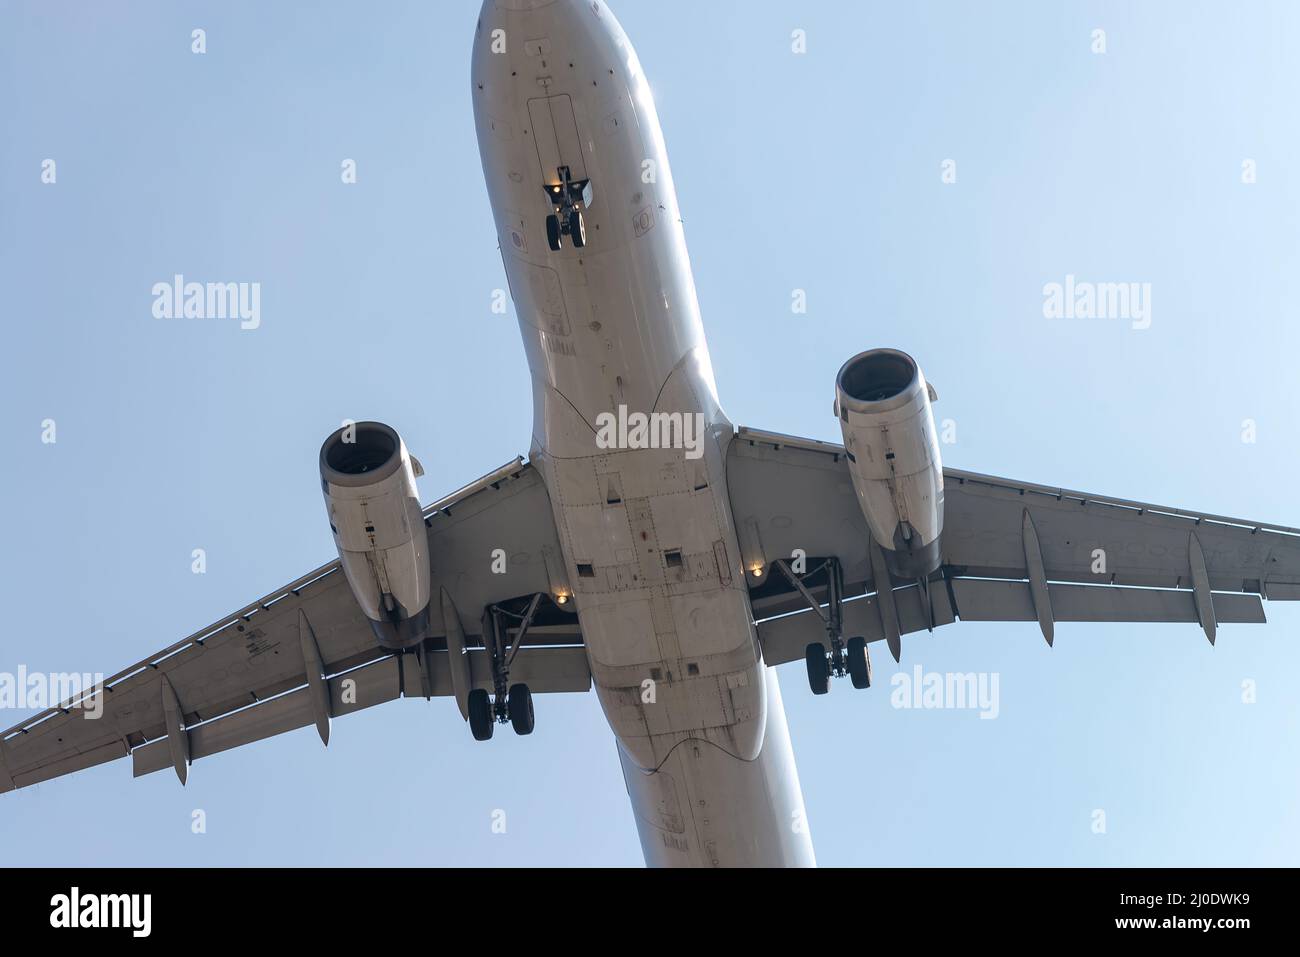 The aircraft approaching the airport to land Stock Photo